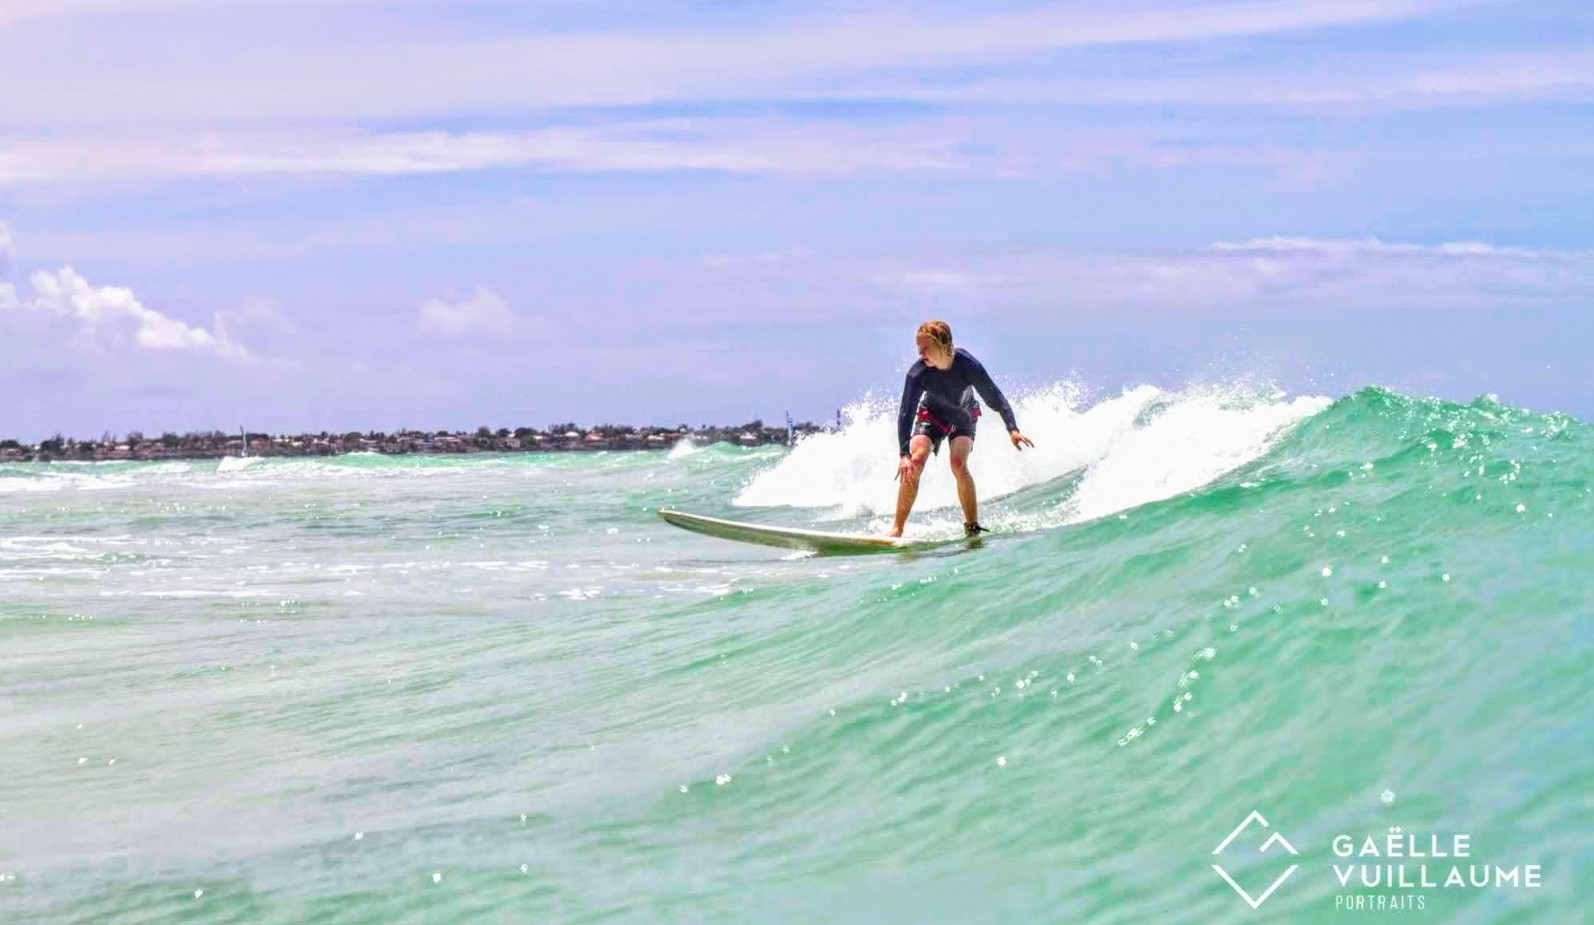 Learn to Surf in Barbados